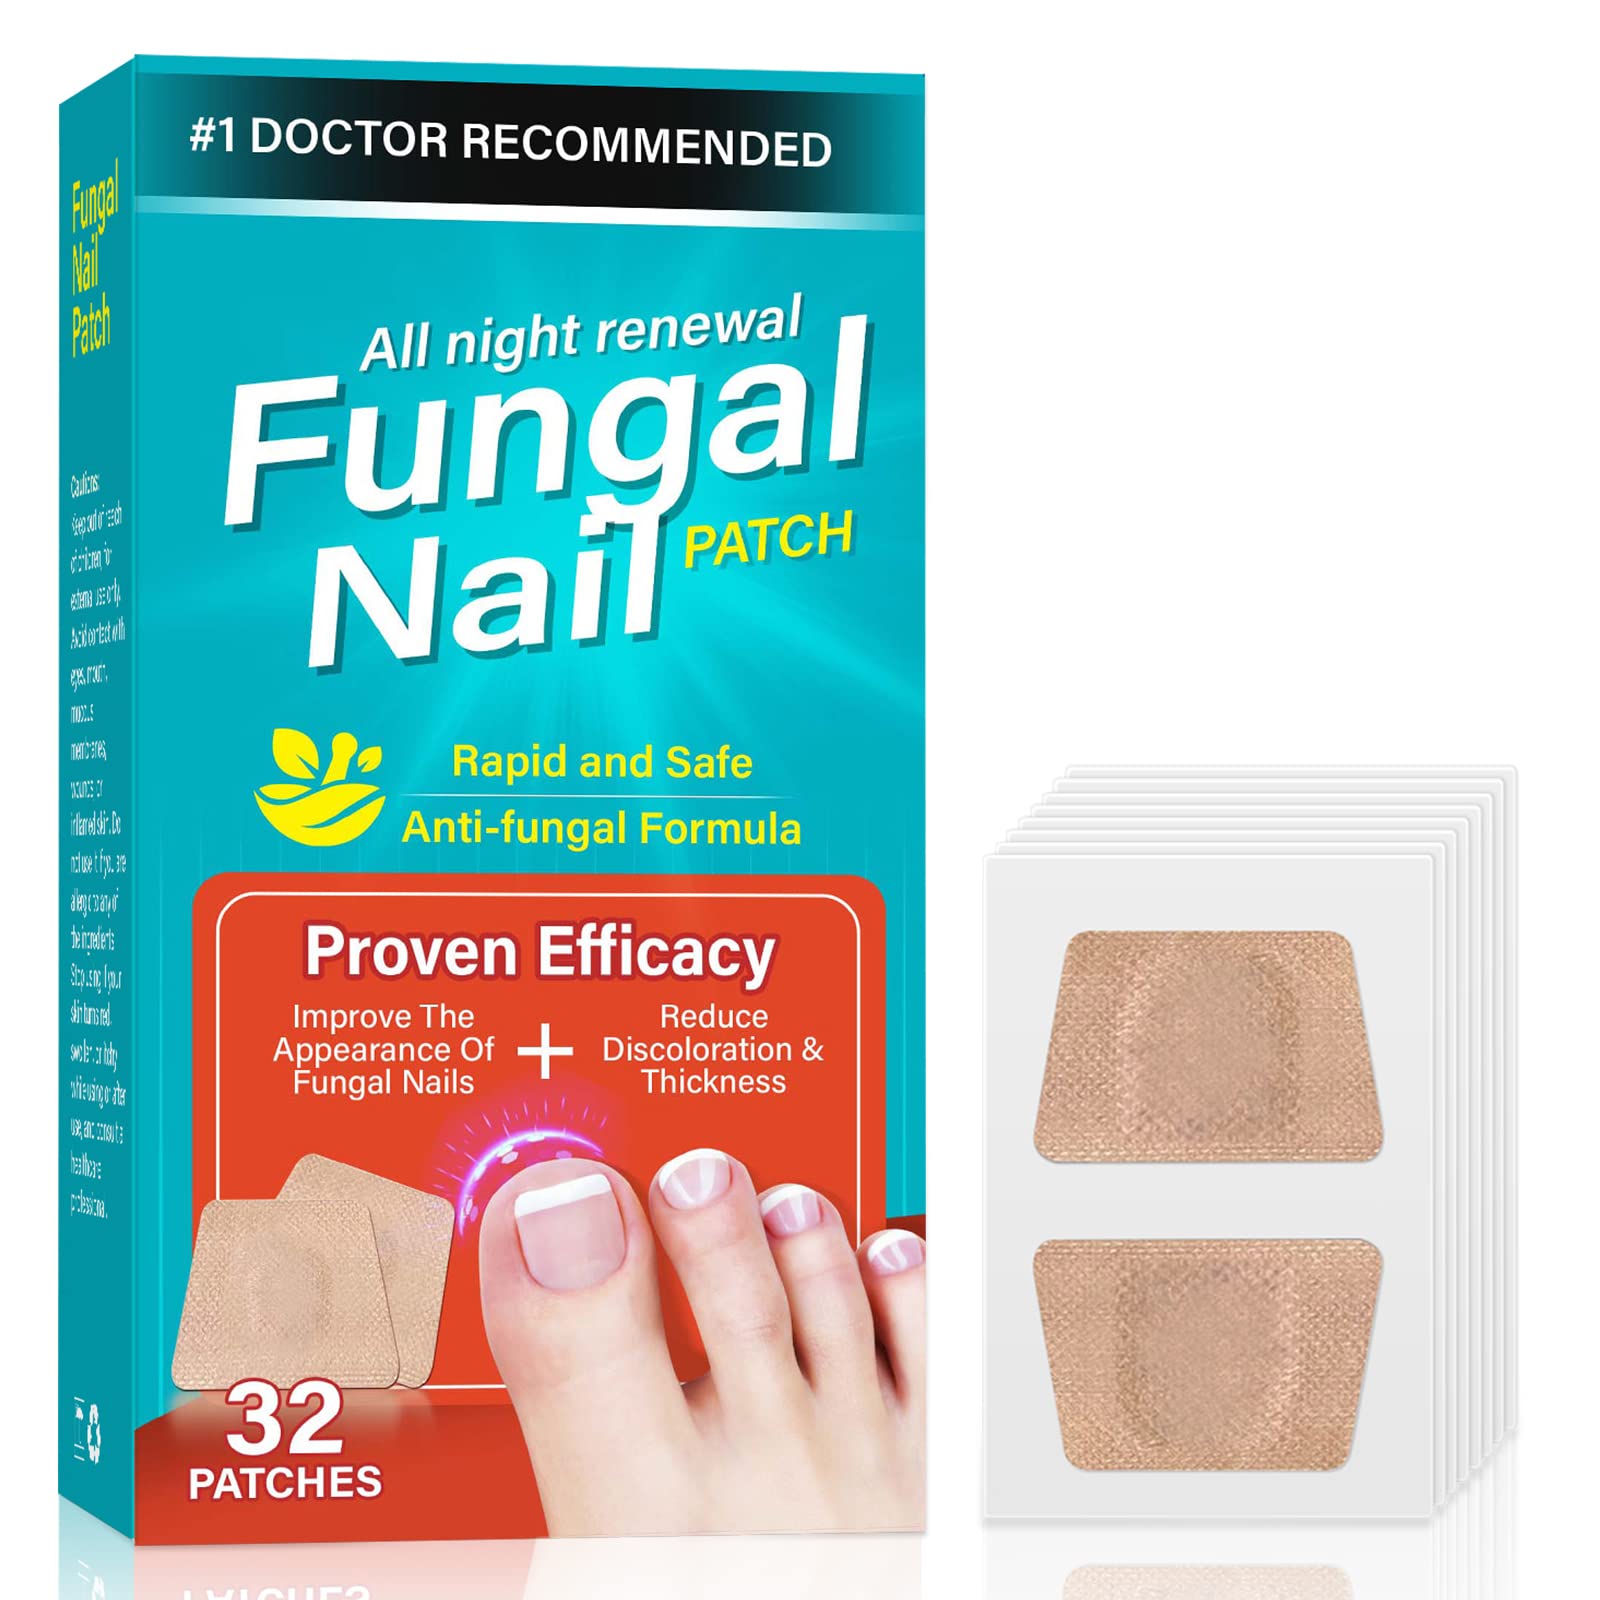 How To Prevent Nail Fungus (And Treat It If It's Already Present) |  Prevention